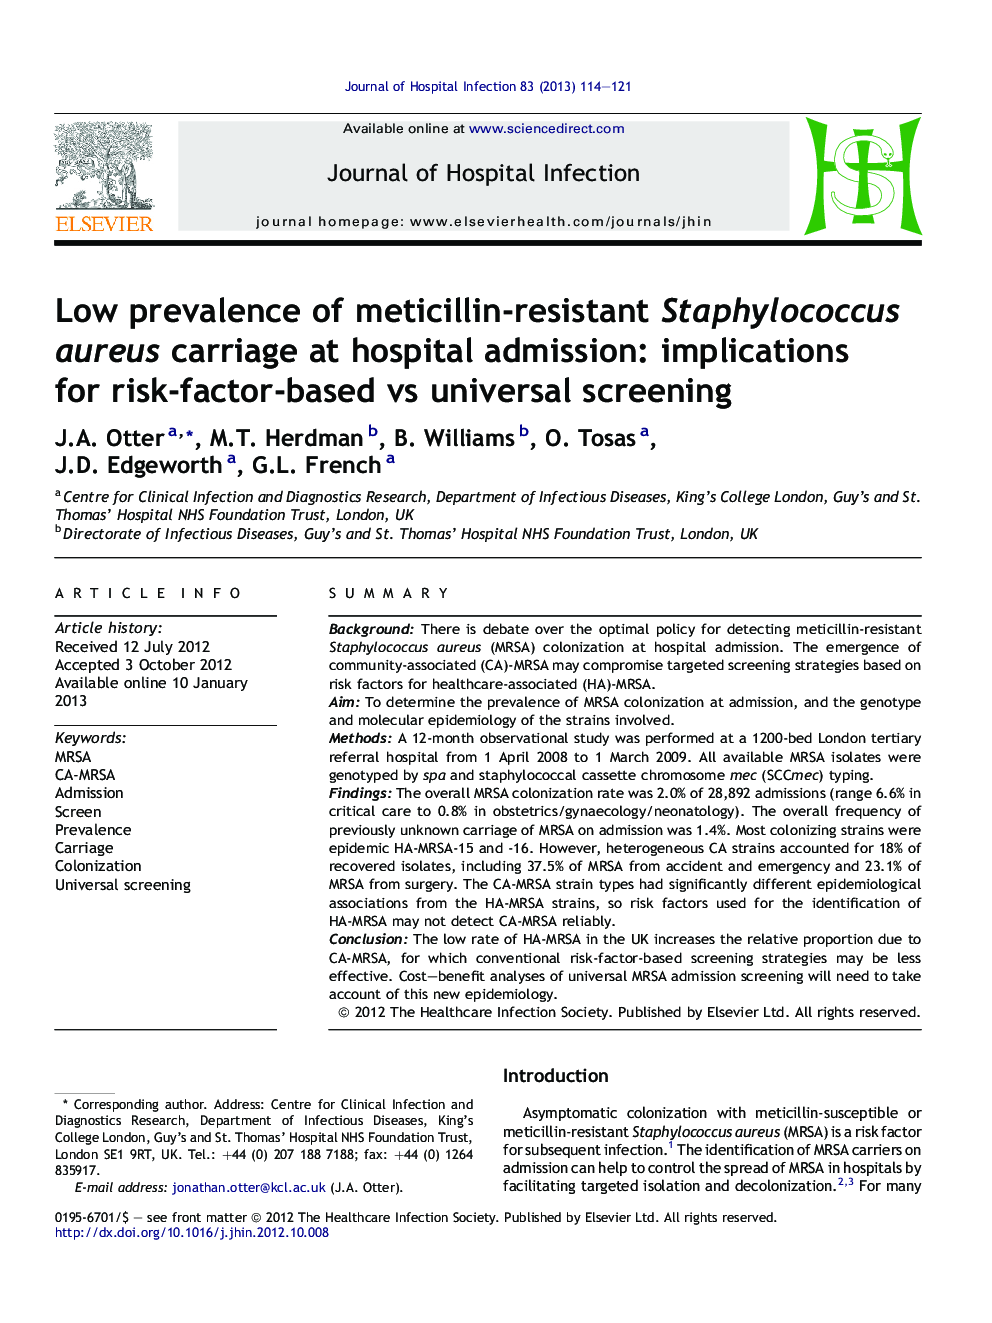 Low prevalence of meticillin-resistant Staphylococcus aureus carriage at hospital admission: implications for risk-factor-based vs universal screening